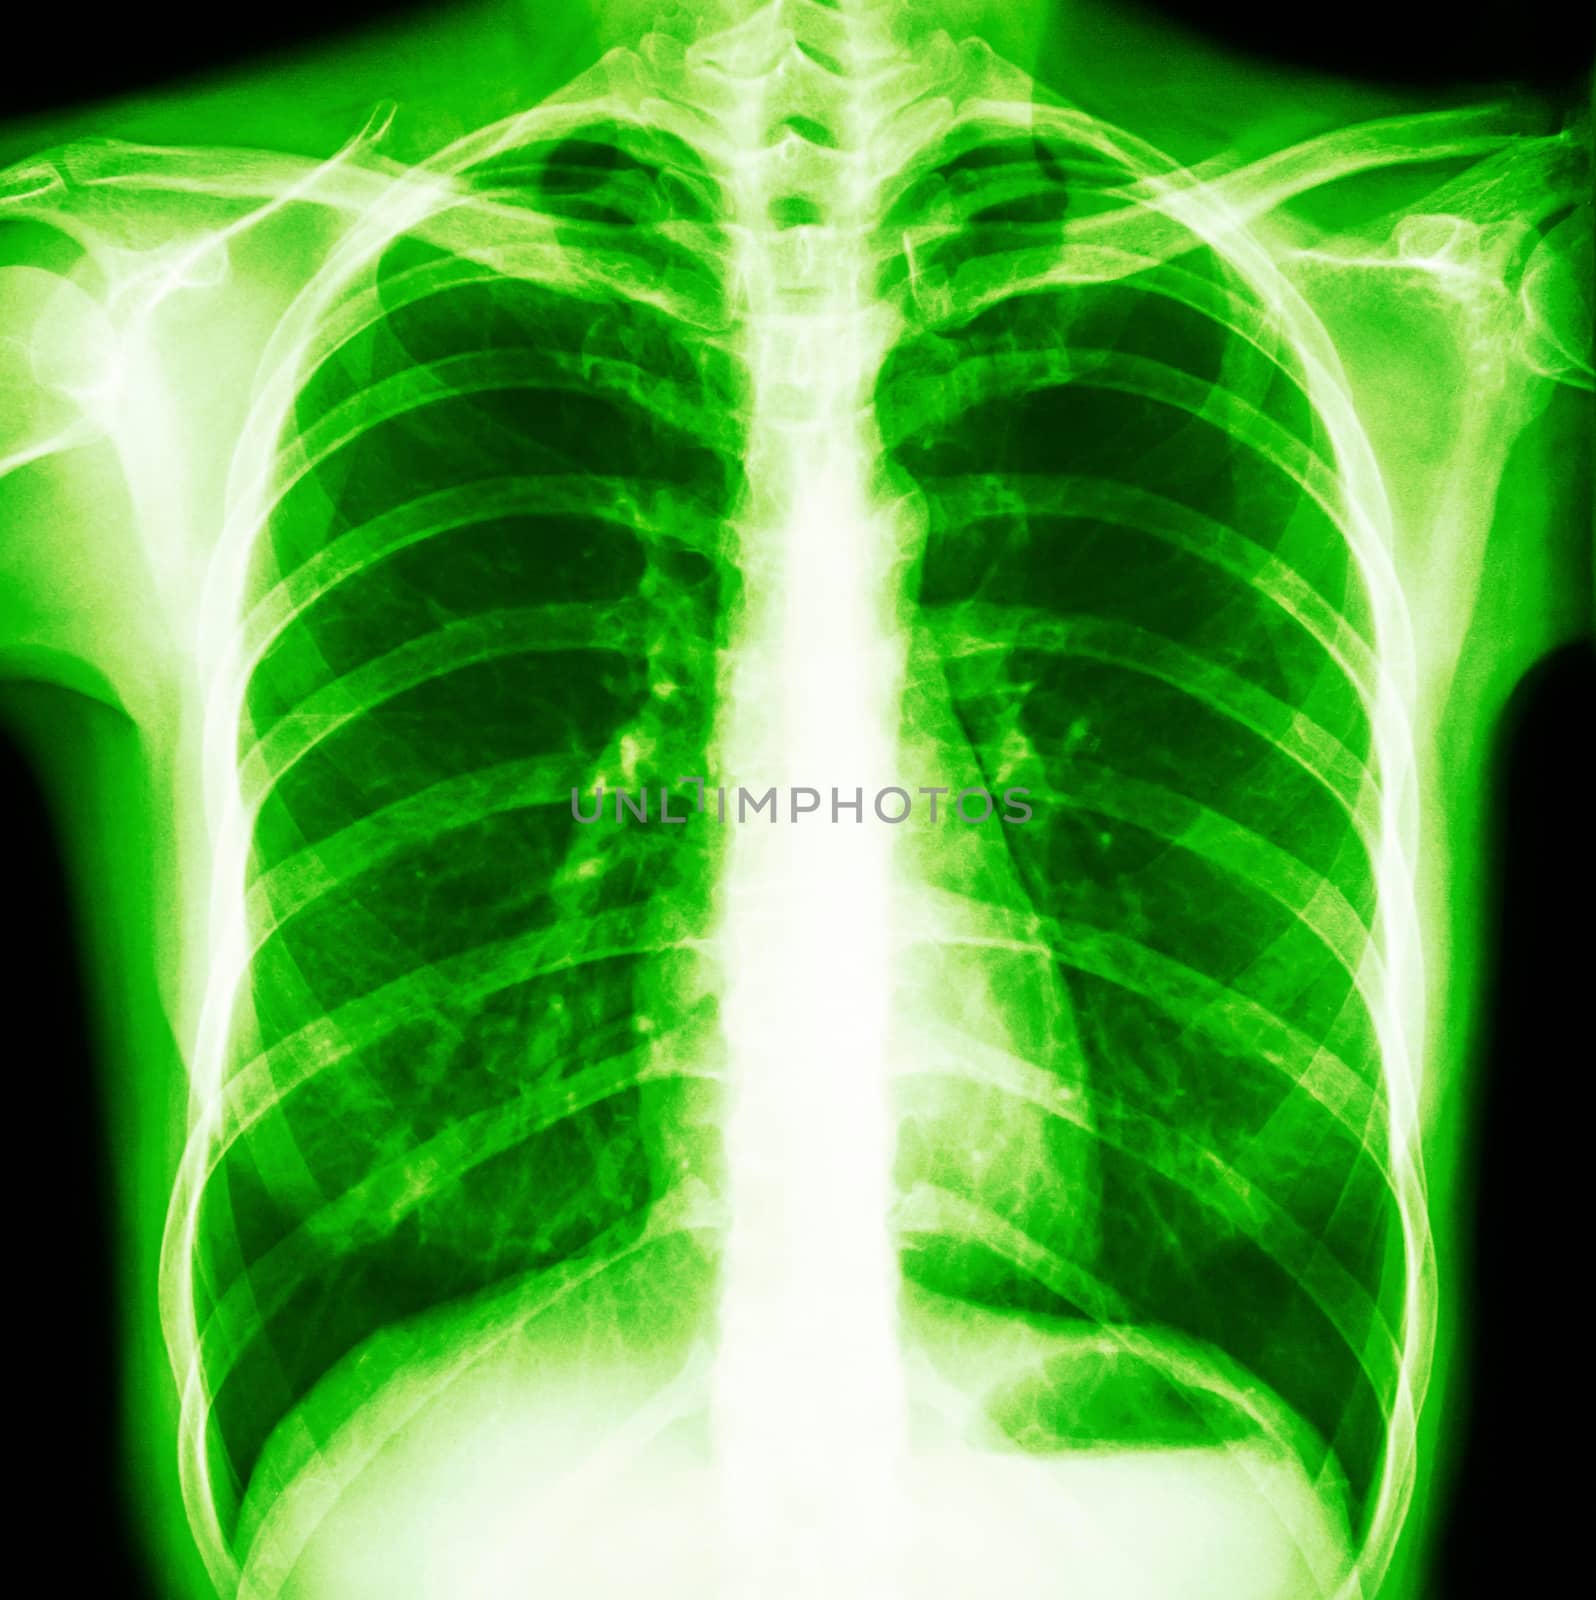 Film chest x-ray PA upright : show normal human's chest